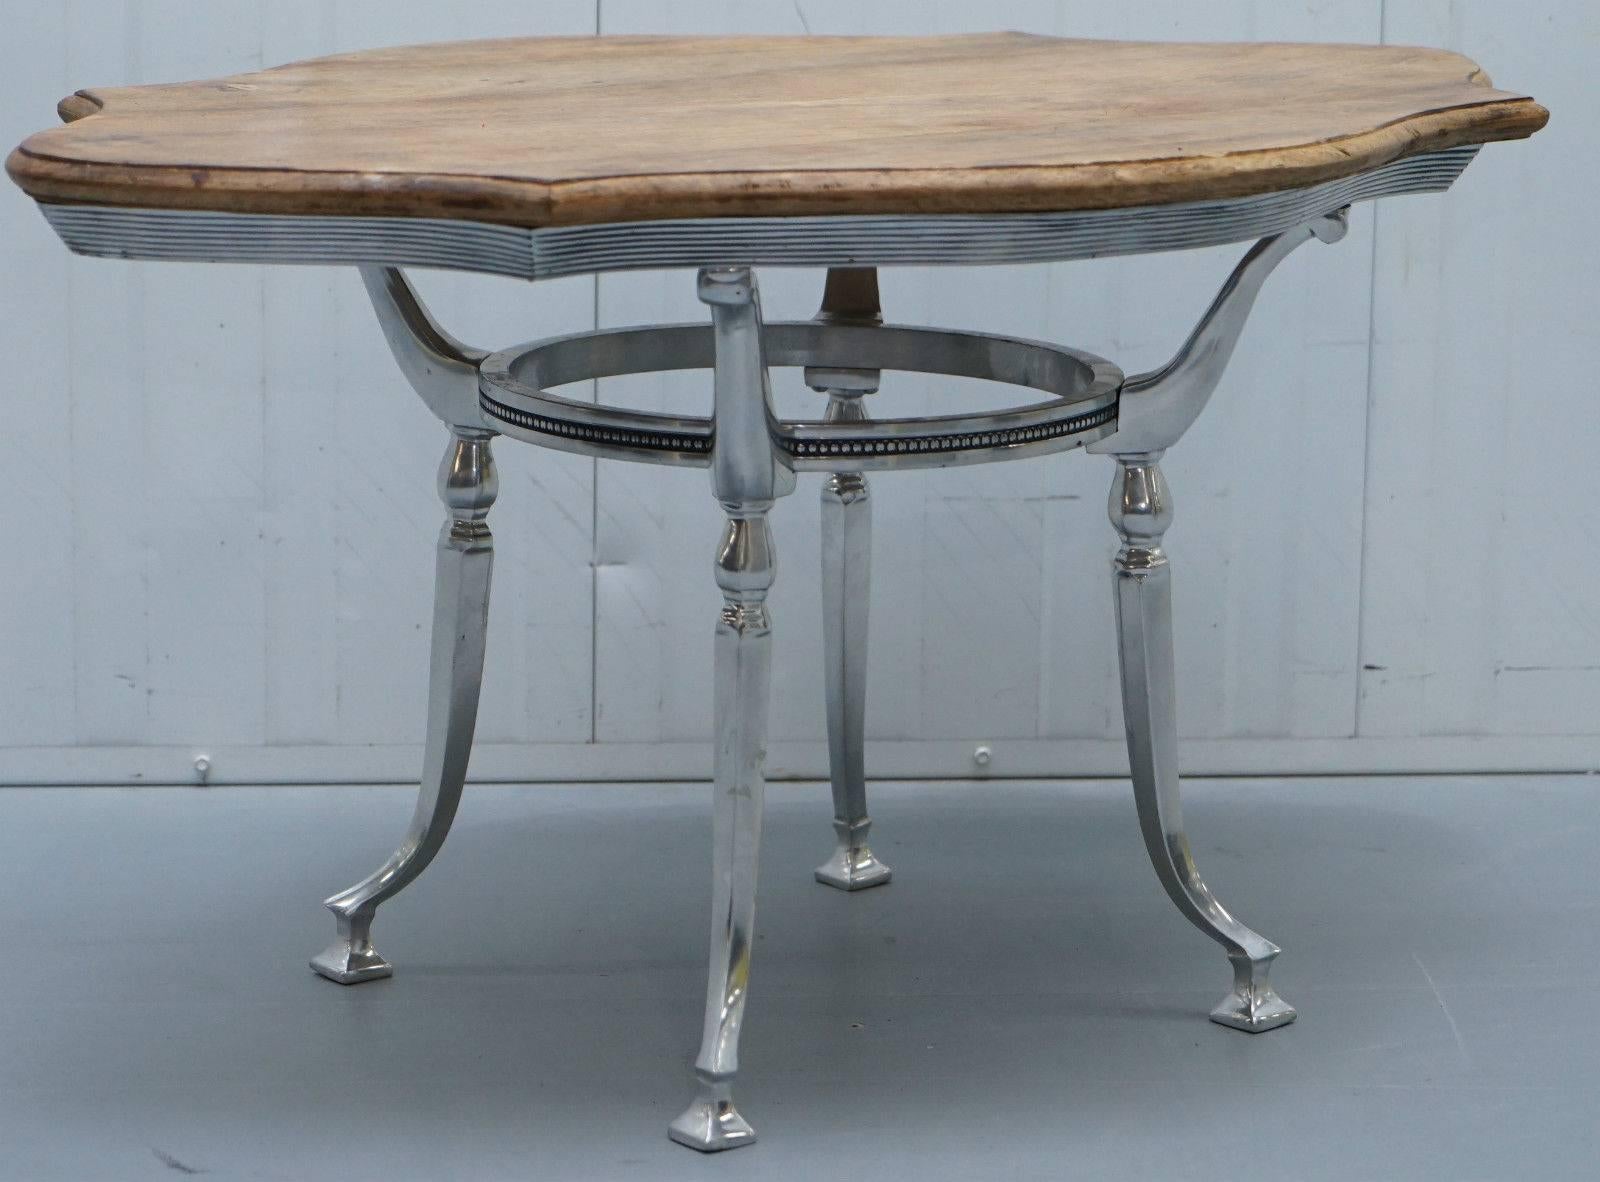 We are delighted to offer for sale this absolutely stunning silver chrome plated coffee table base with stripped oak natural patina top

A really very lovely thing in A1 perfect condition, I have never seen such a well-chromed piece, it almost